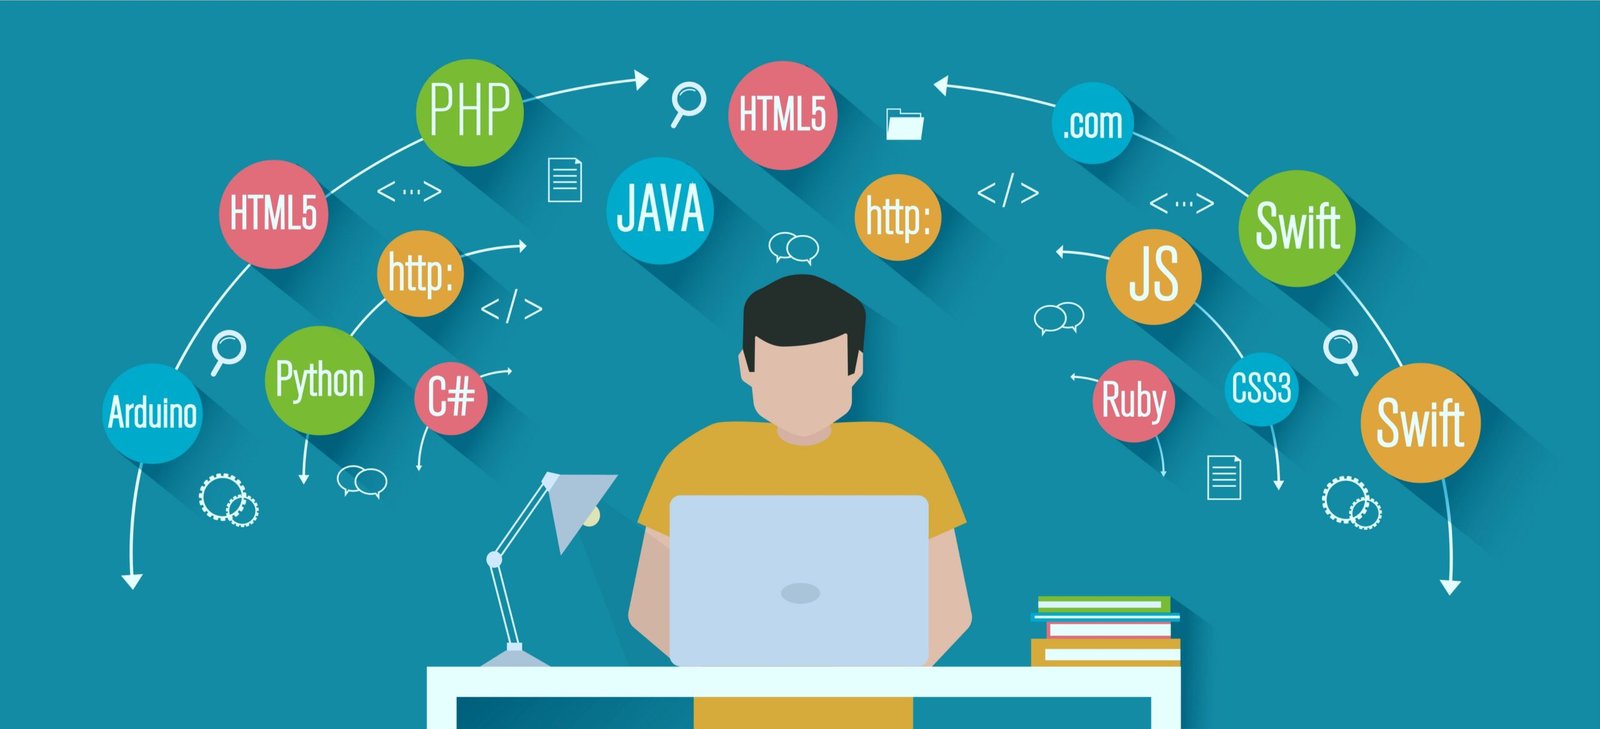 Introduction to Programming Languages: Provide an overview of programming languages ​​and their importance in software development